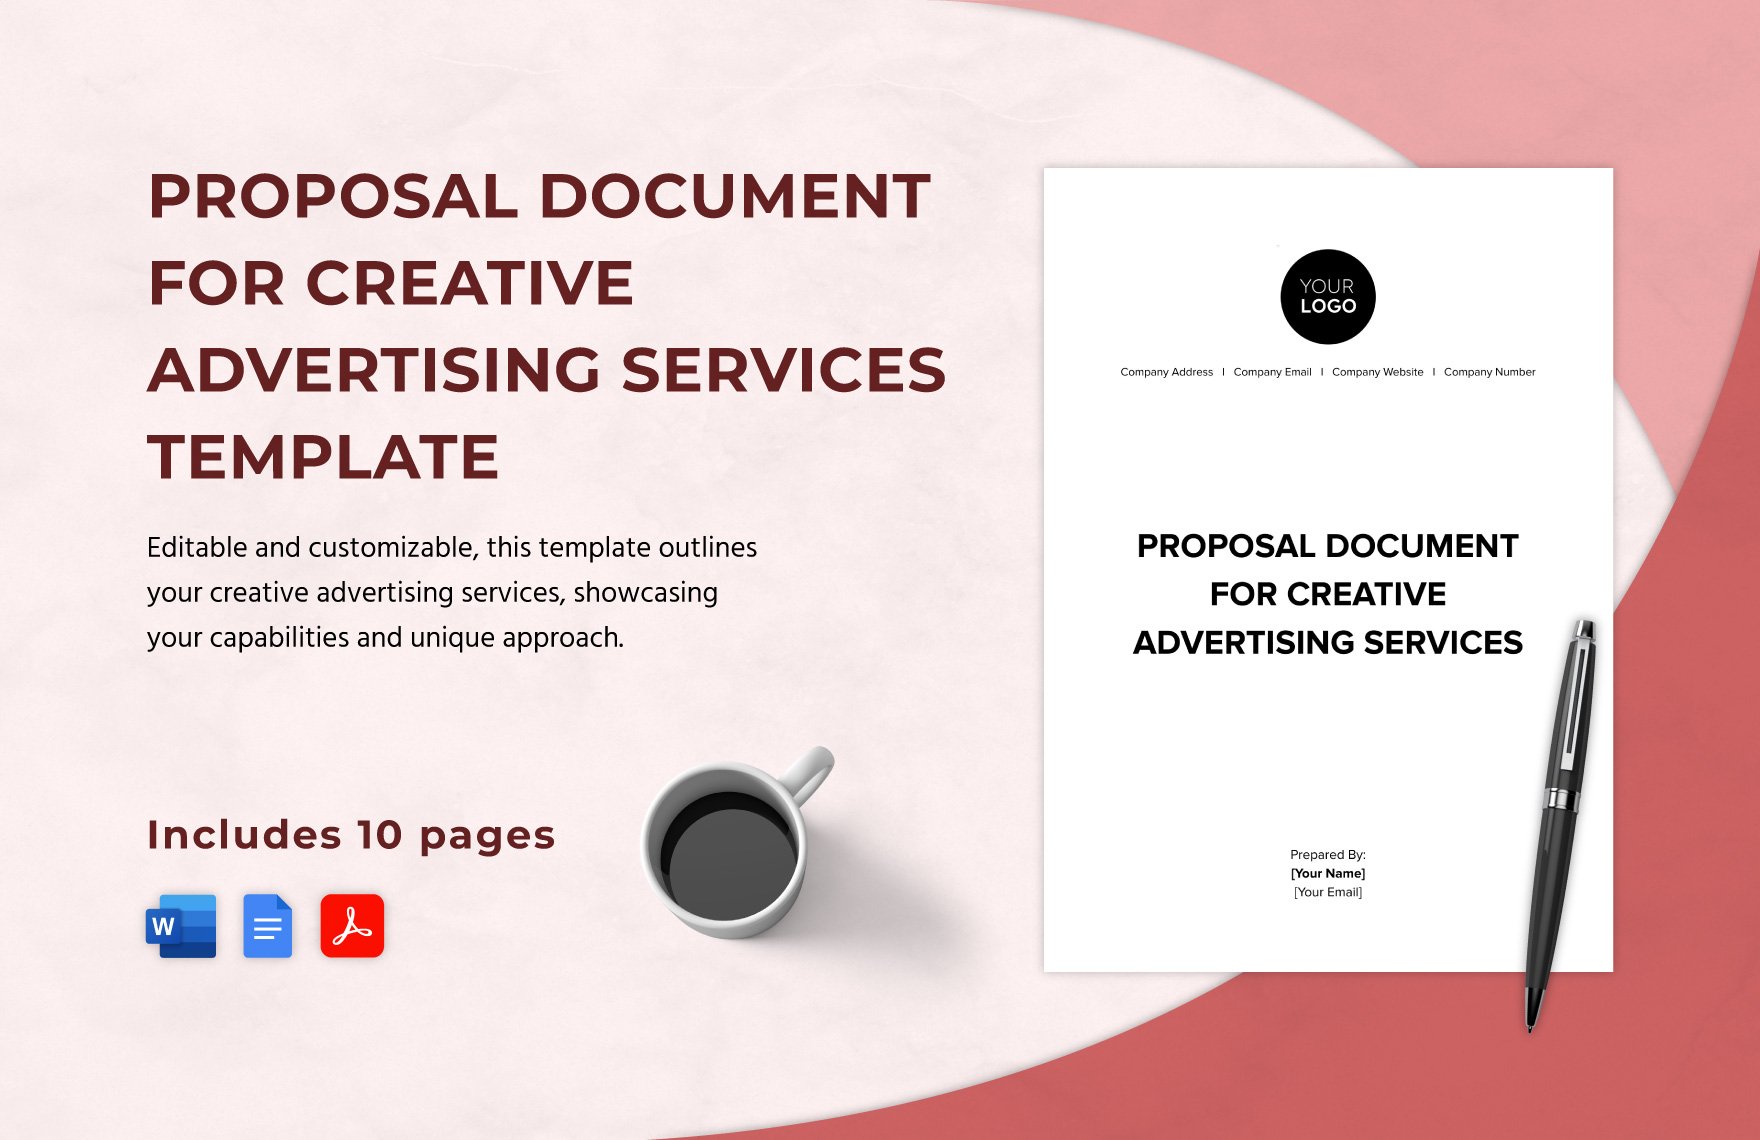 Proposal Document for Creative Advertising Services Template